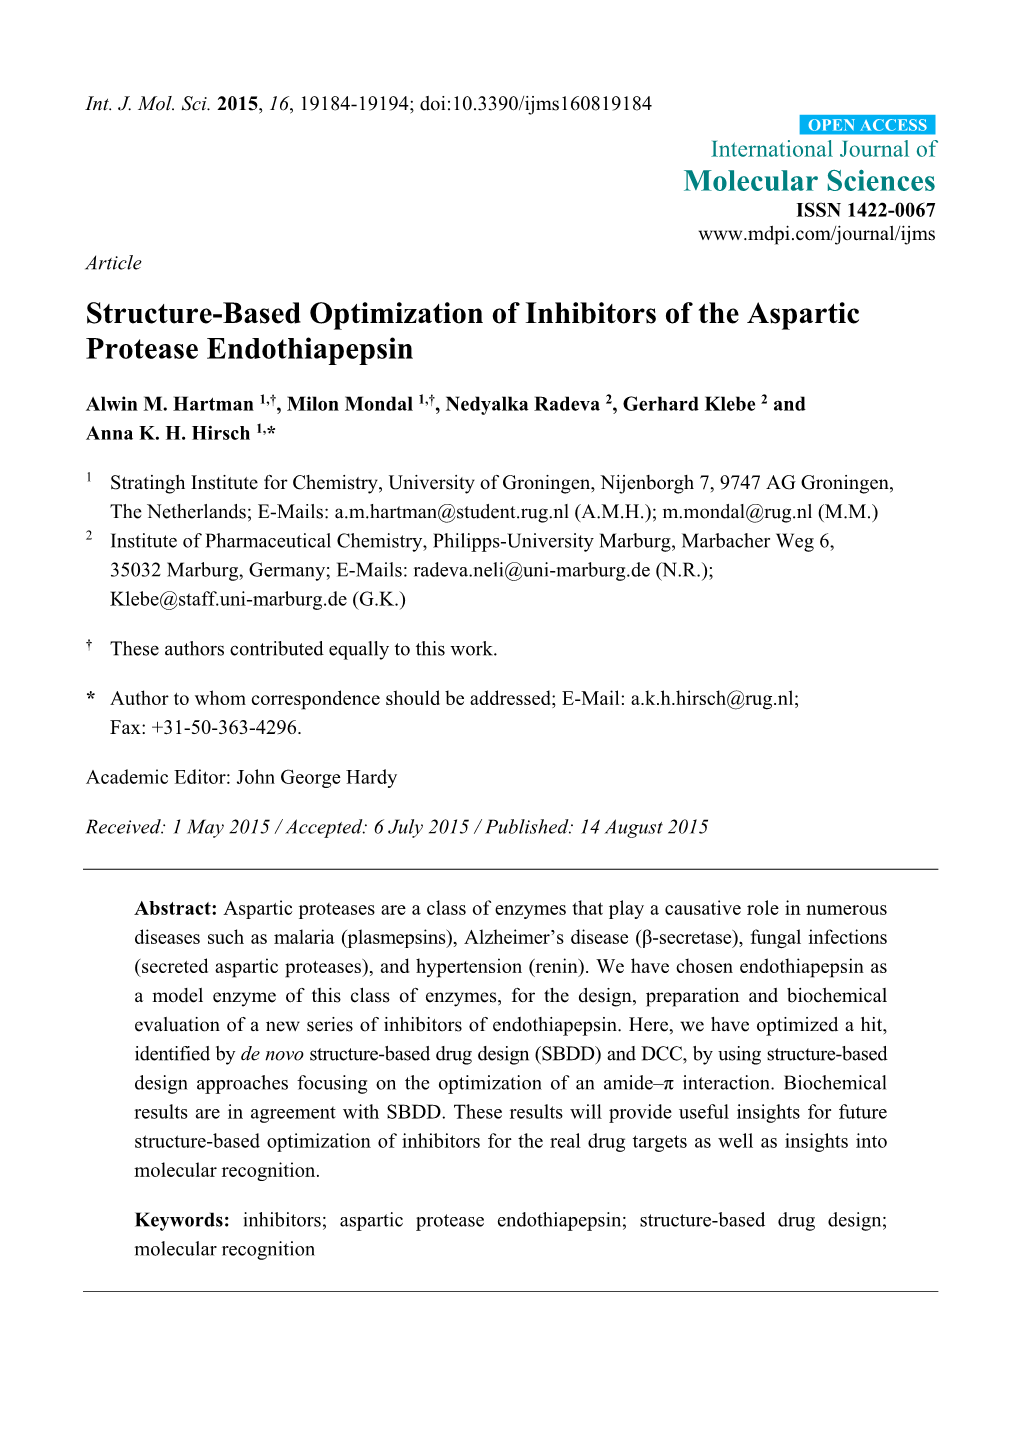 Structure-Based Optimization of Inhibitors of the Aspartic Protease Endothiapepsin